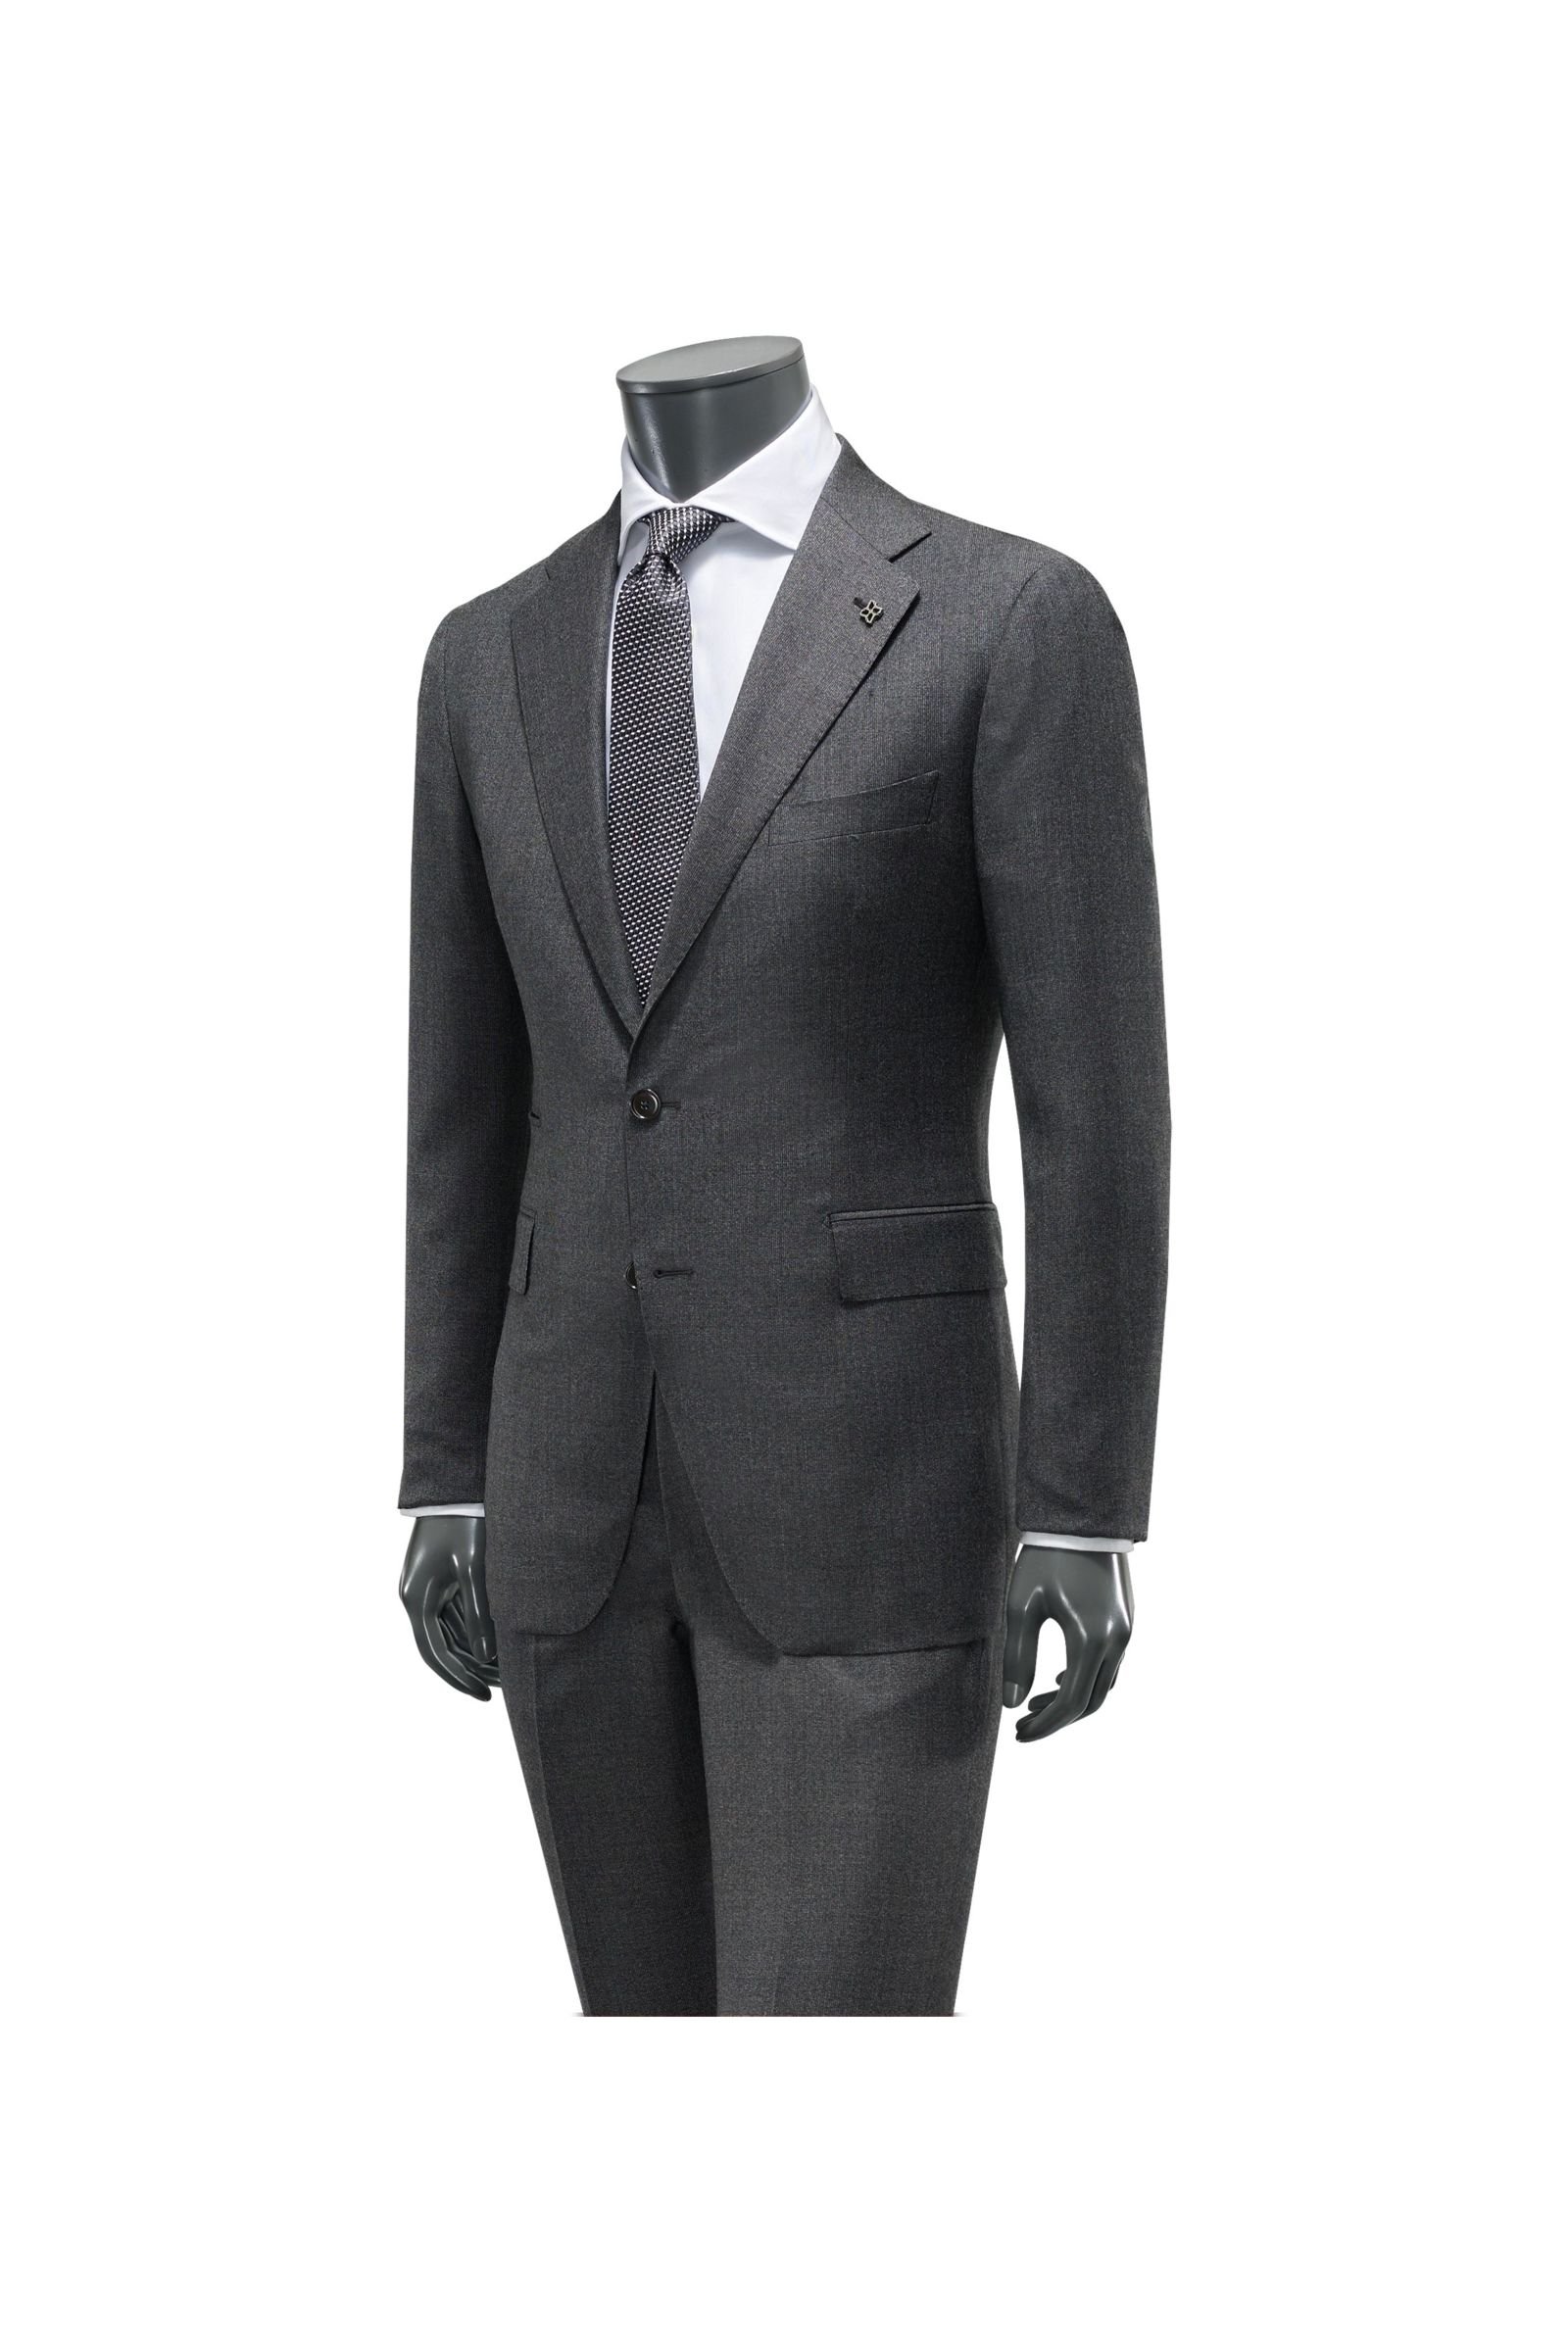 Suit grey-brown patterned